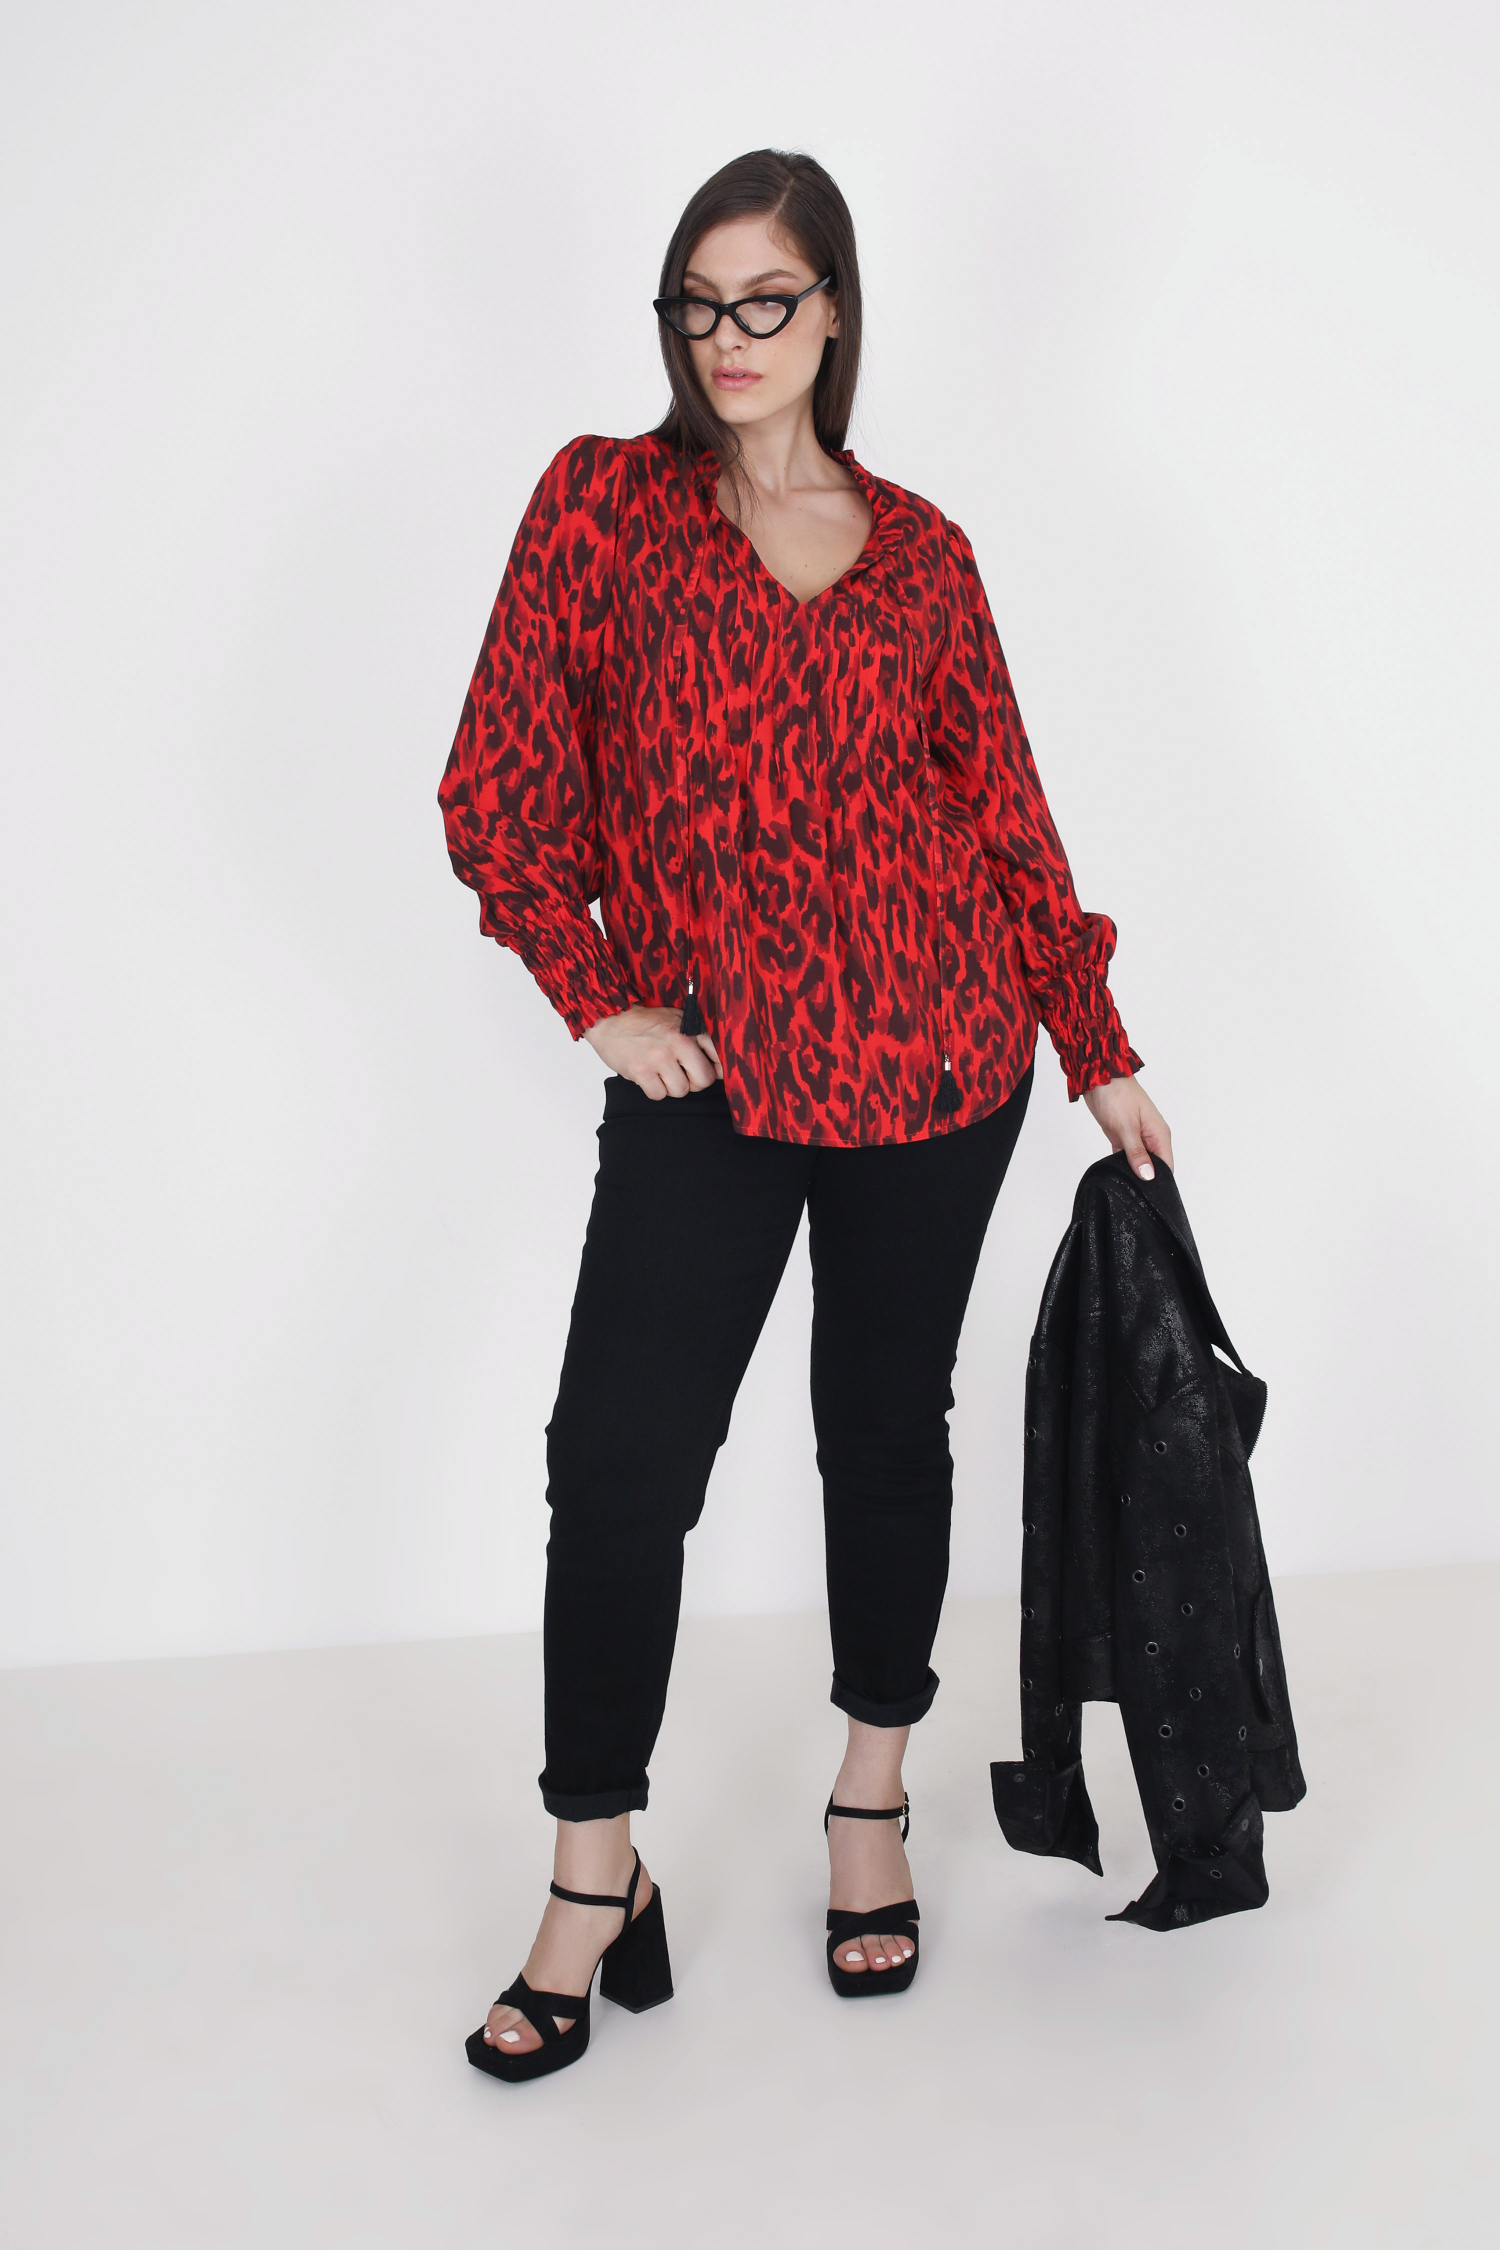 Red panther print blouse